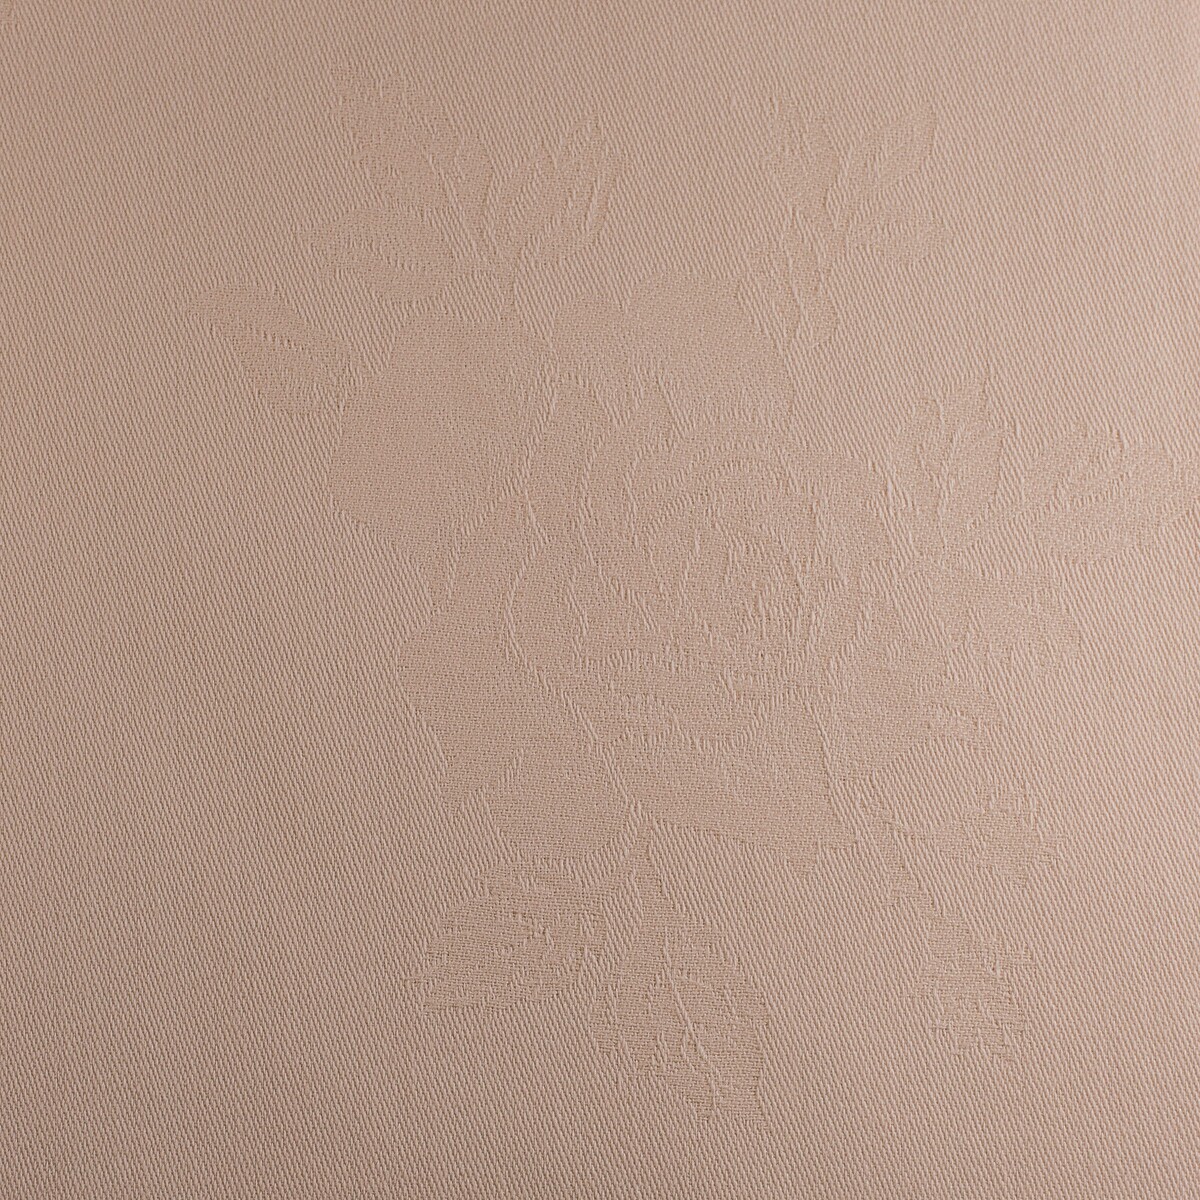 Peach Damask Solid